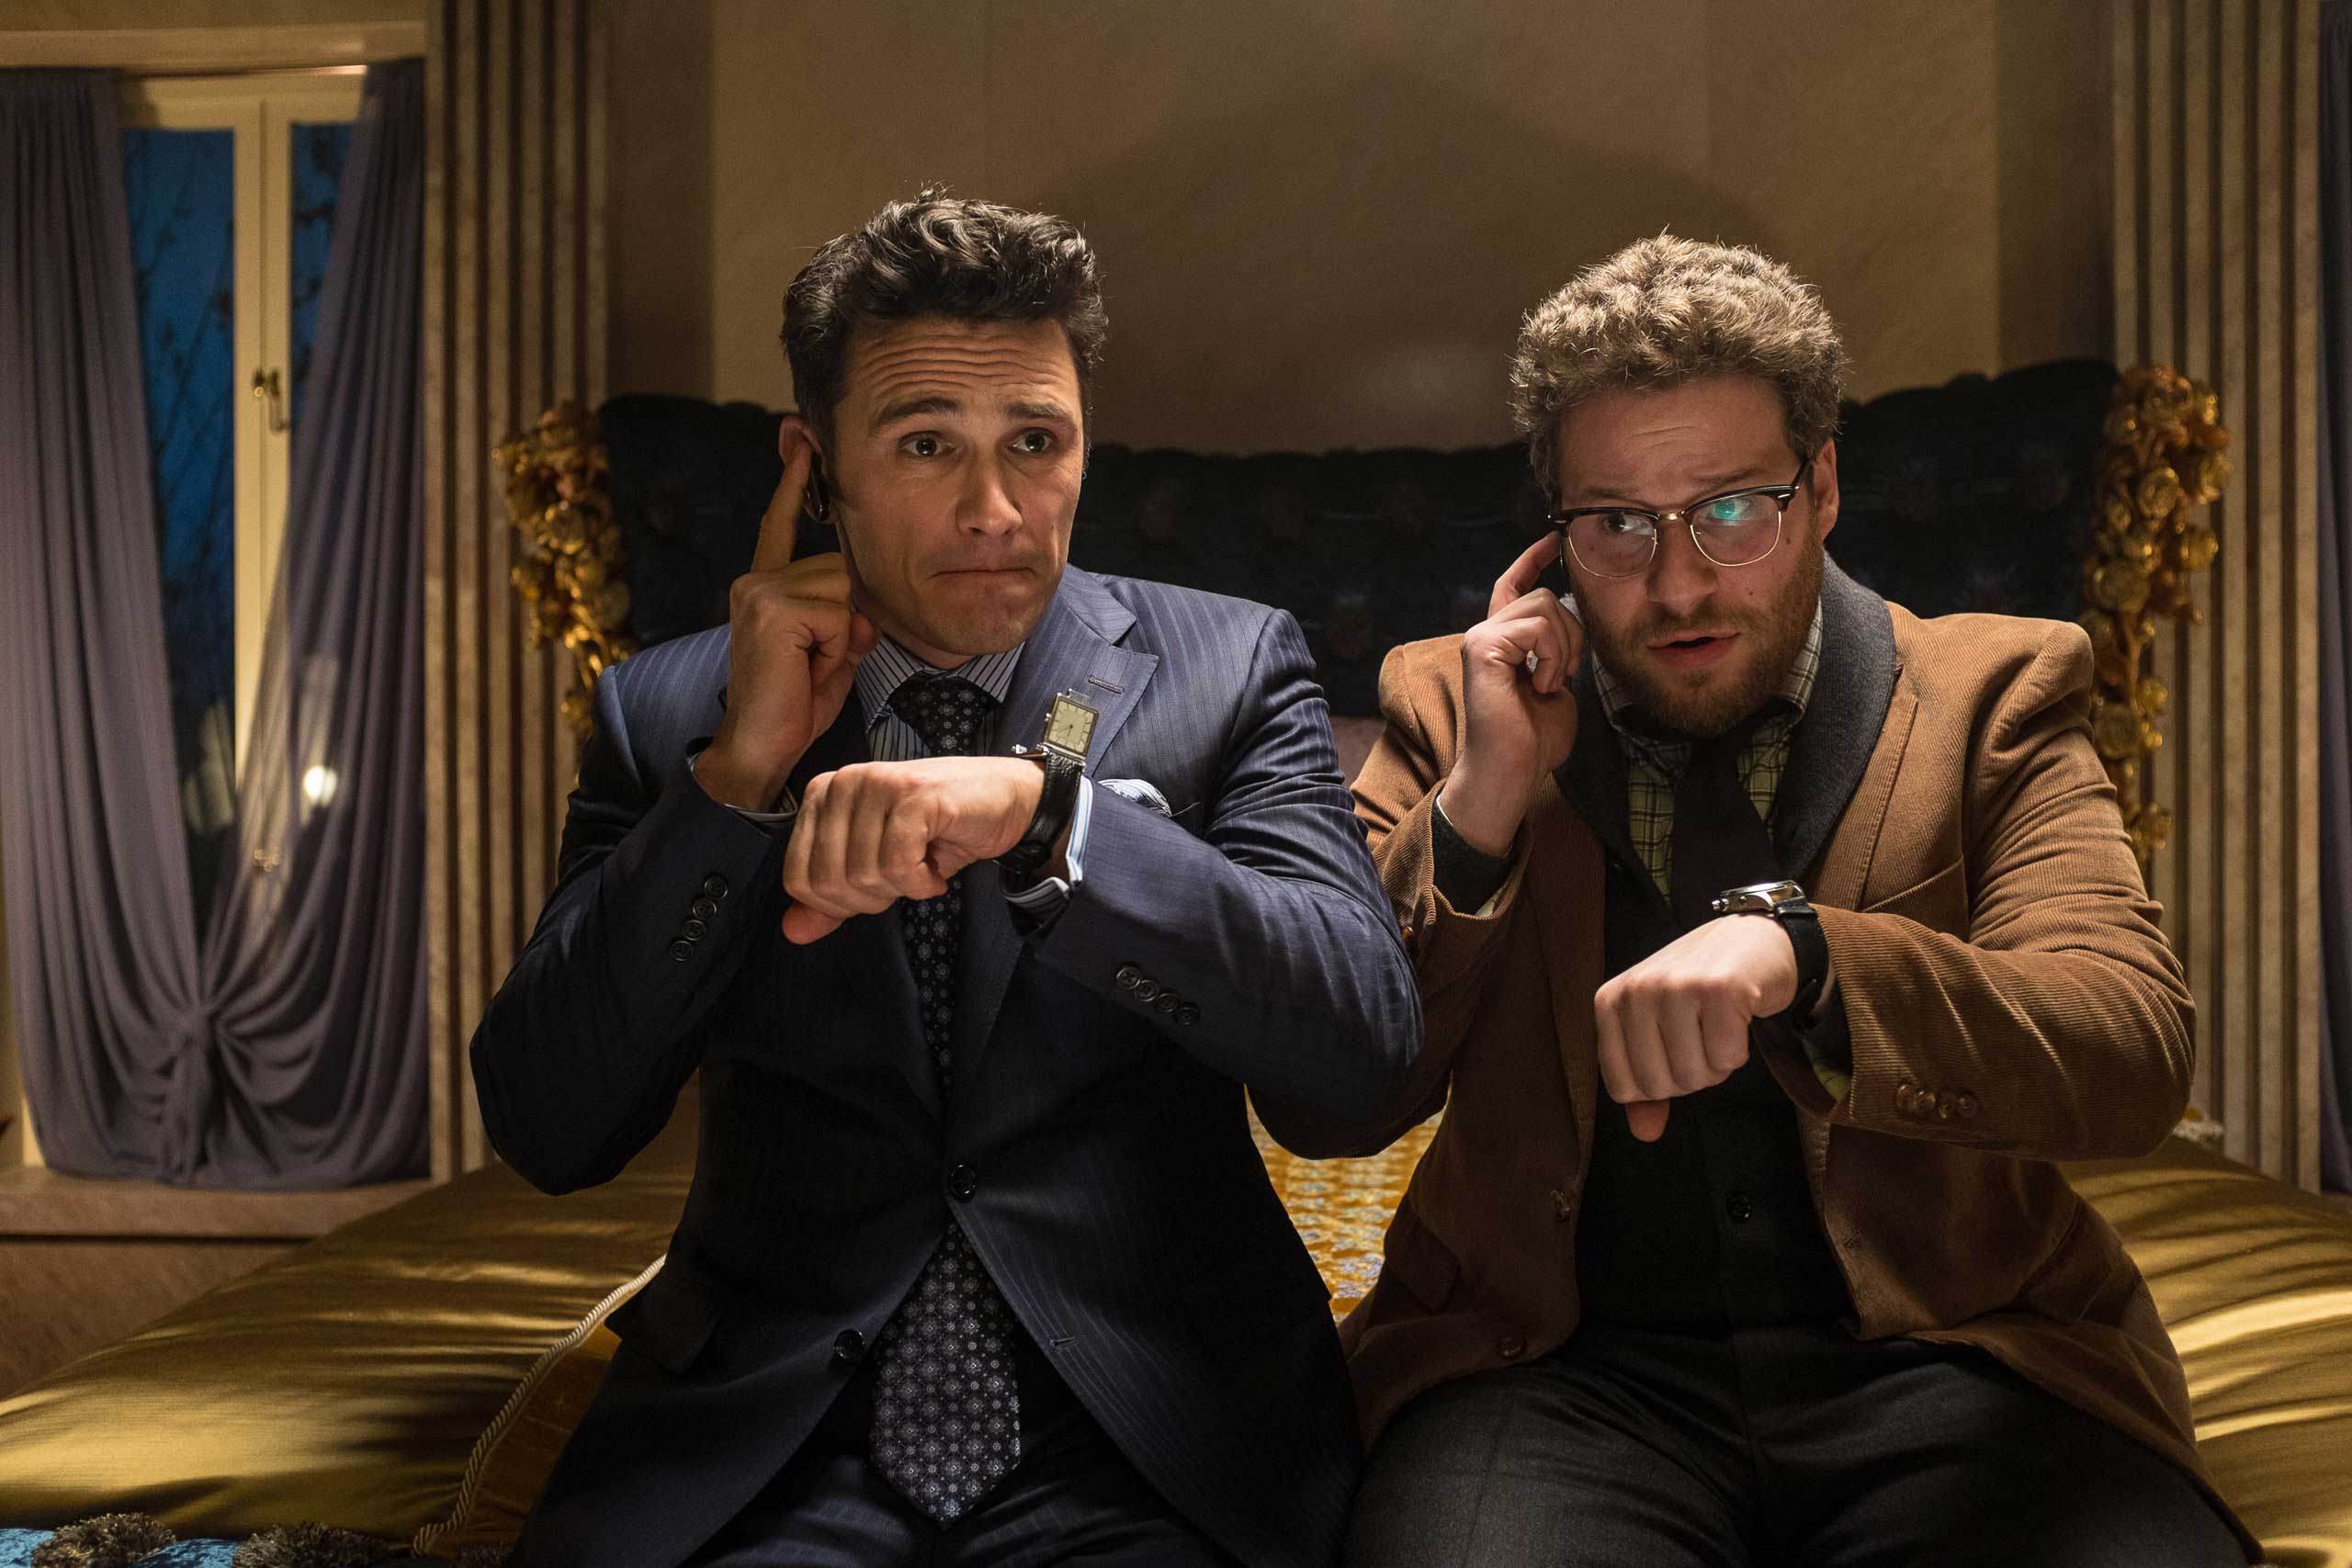 James Franco, left, as Dave, and Seth Rogen as Aaron, in a scene from "The Interview." (Ed Araquel—Sony Pictures/AP)